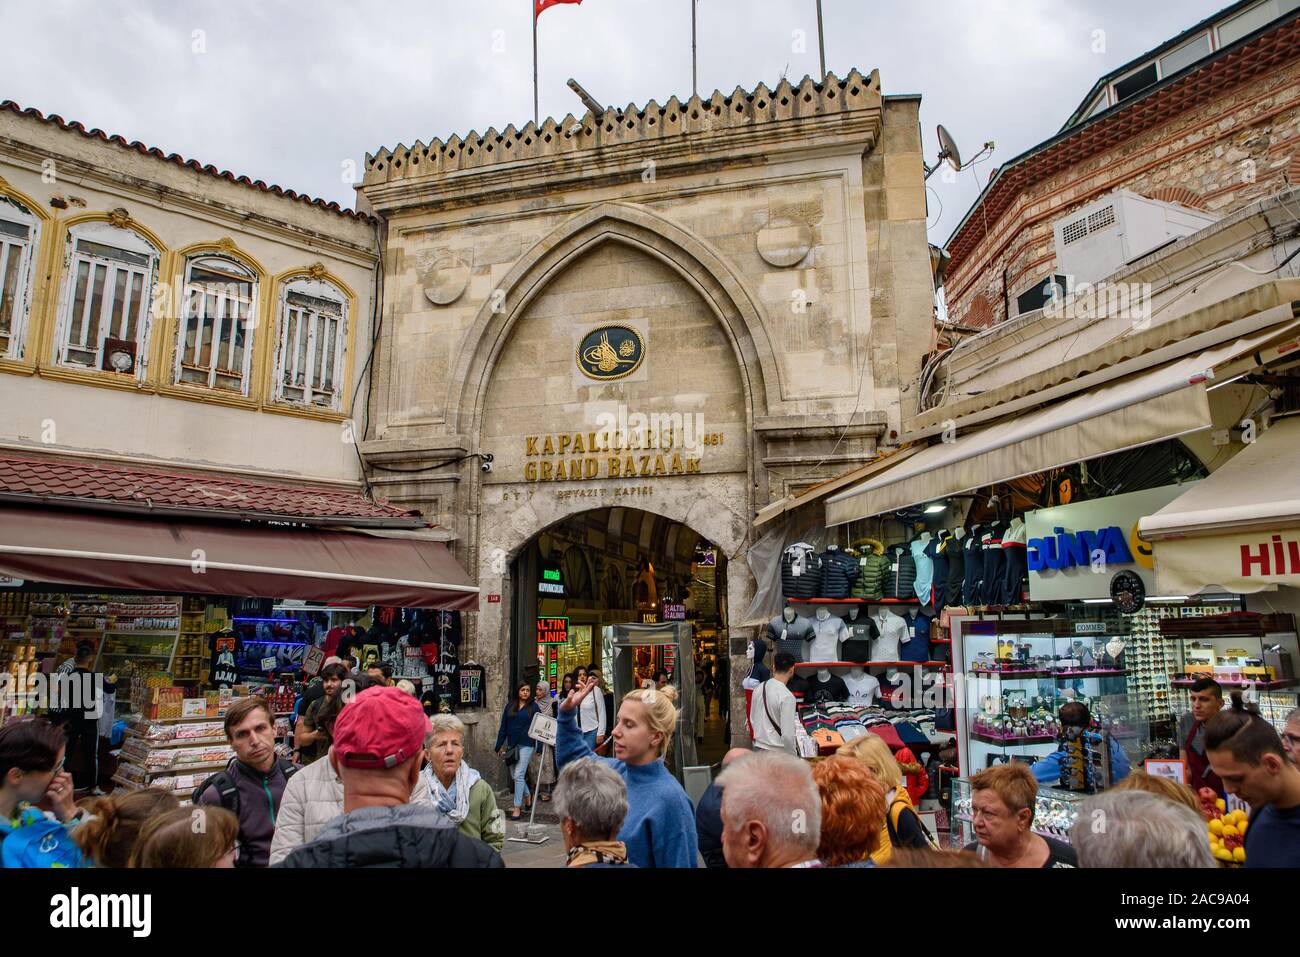 Entrance of Grand Bazaar in Istanbul, one of the largest and oldest covered markets in the world Stock Photo